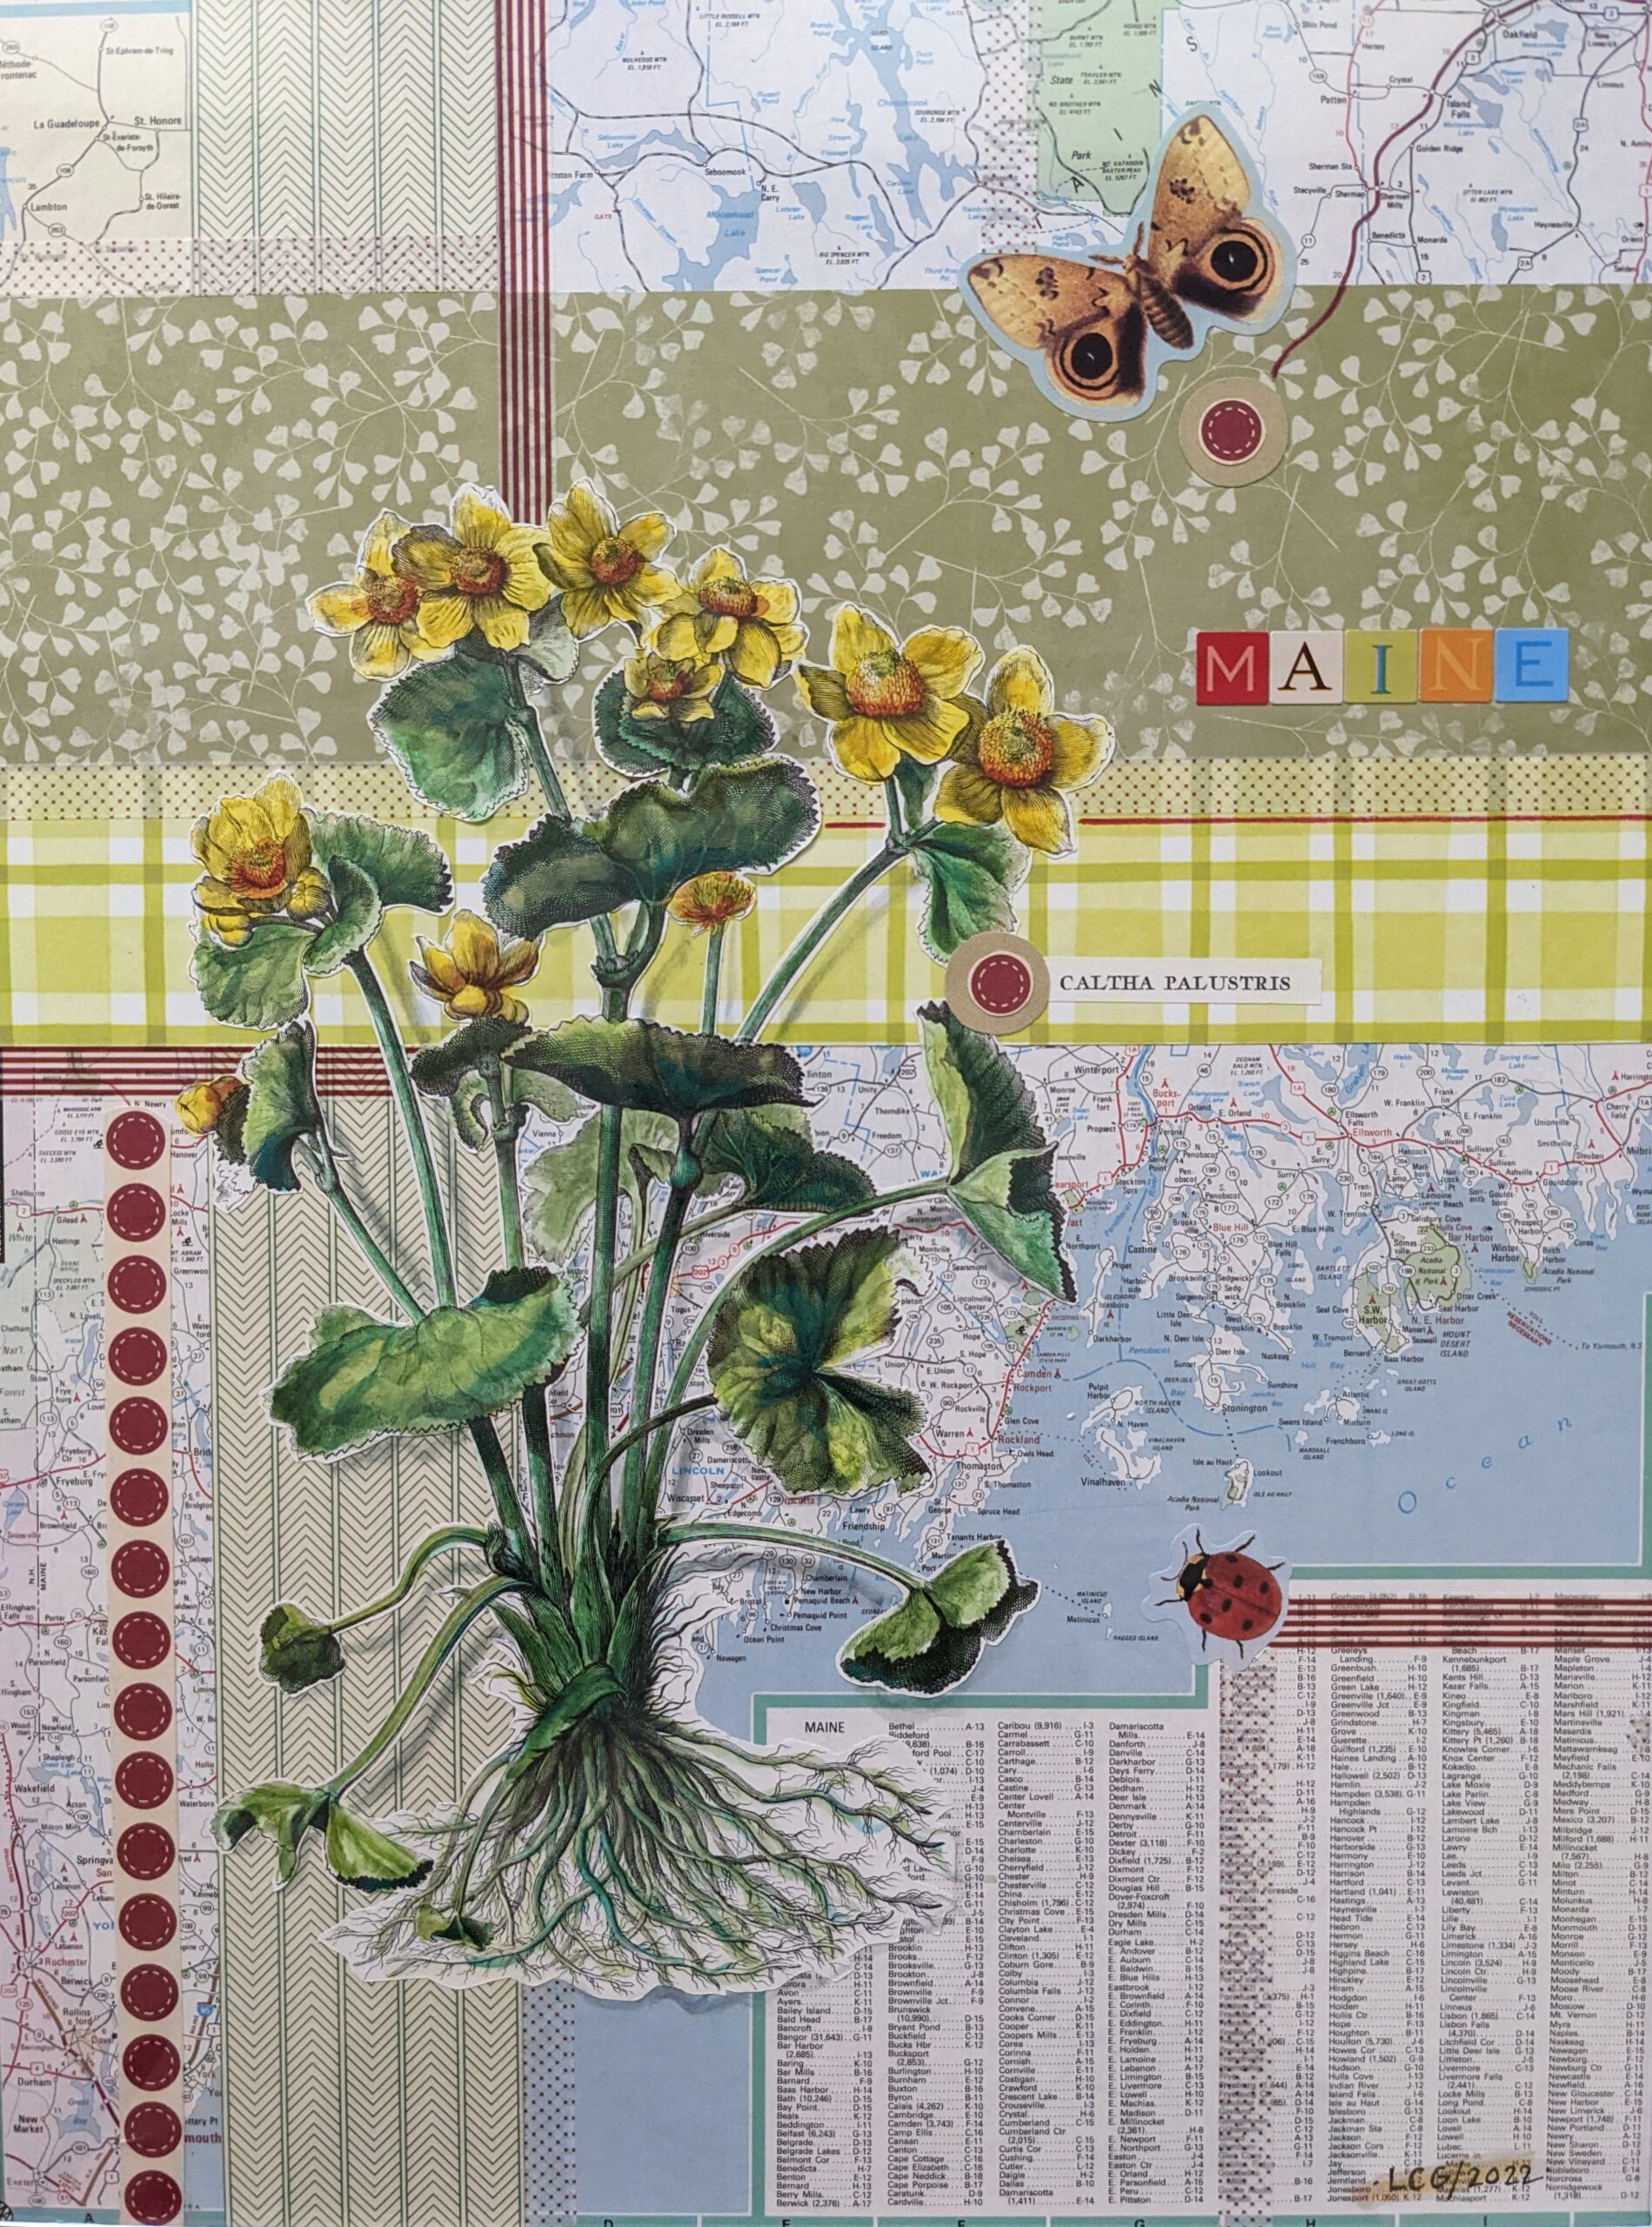 Caltha Palustris/Marsh Marigold, mixed media collage with hand-colored botanical print and vintage map 12 x 16, matted, $150, Lori Capron Galan. The artist has designated 100% of this sale to go to the library fund.